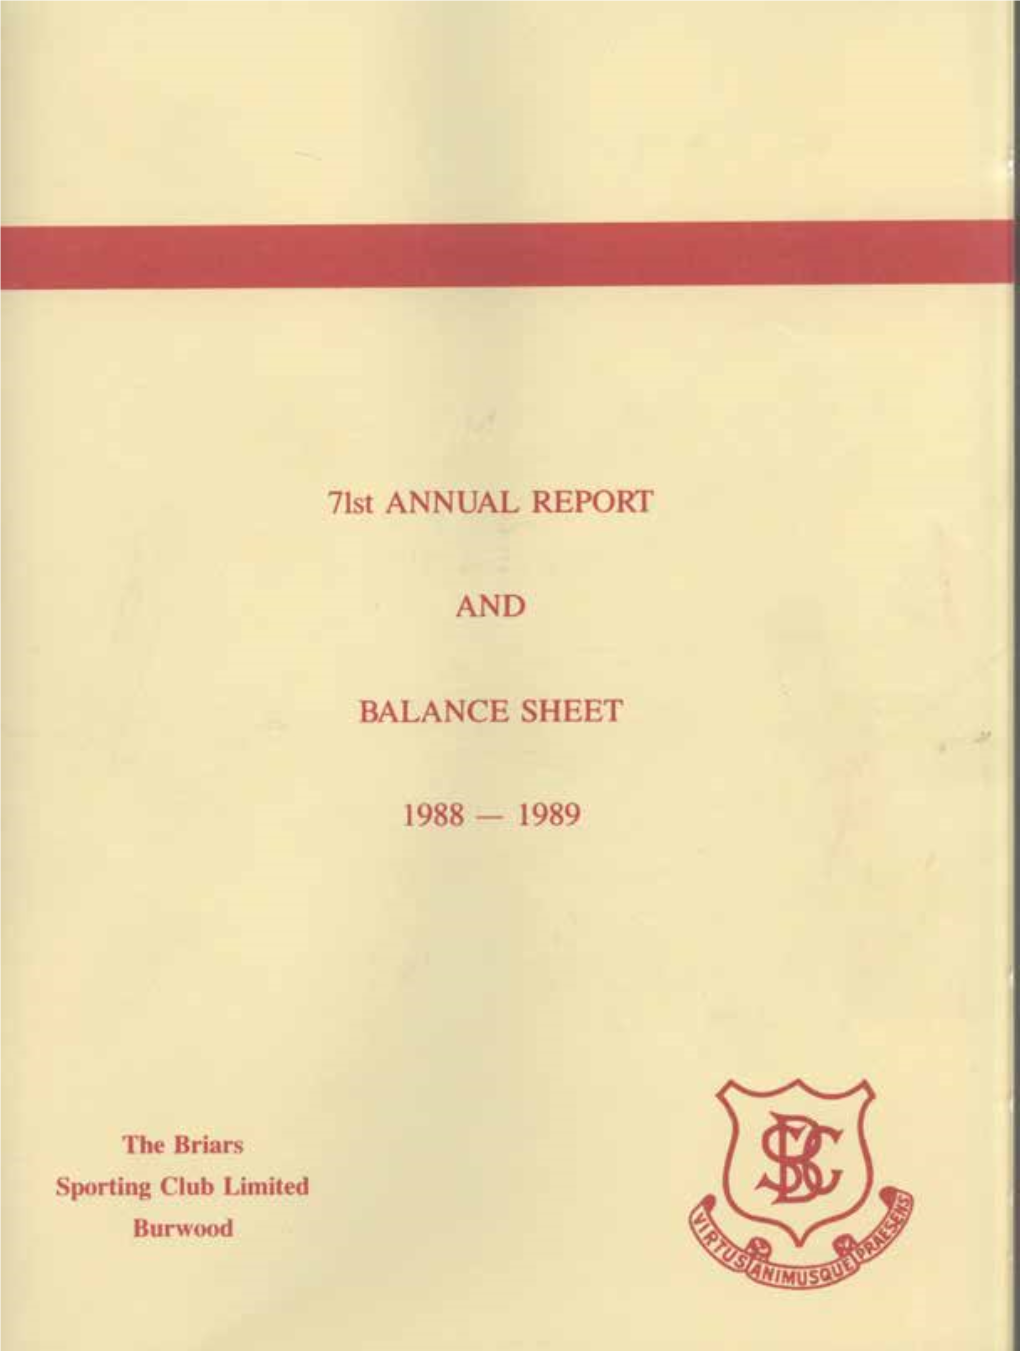 The Briars Sporting Club Limited Annual Reports 1988-89